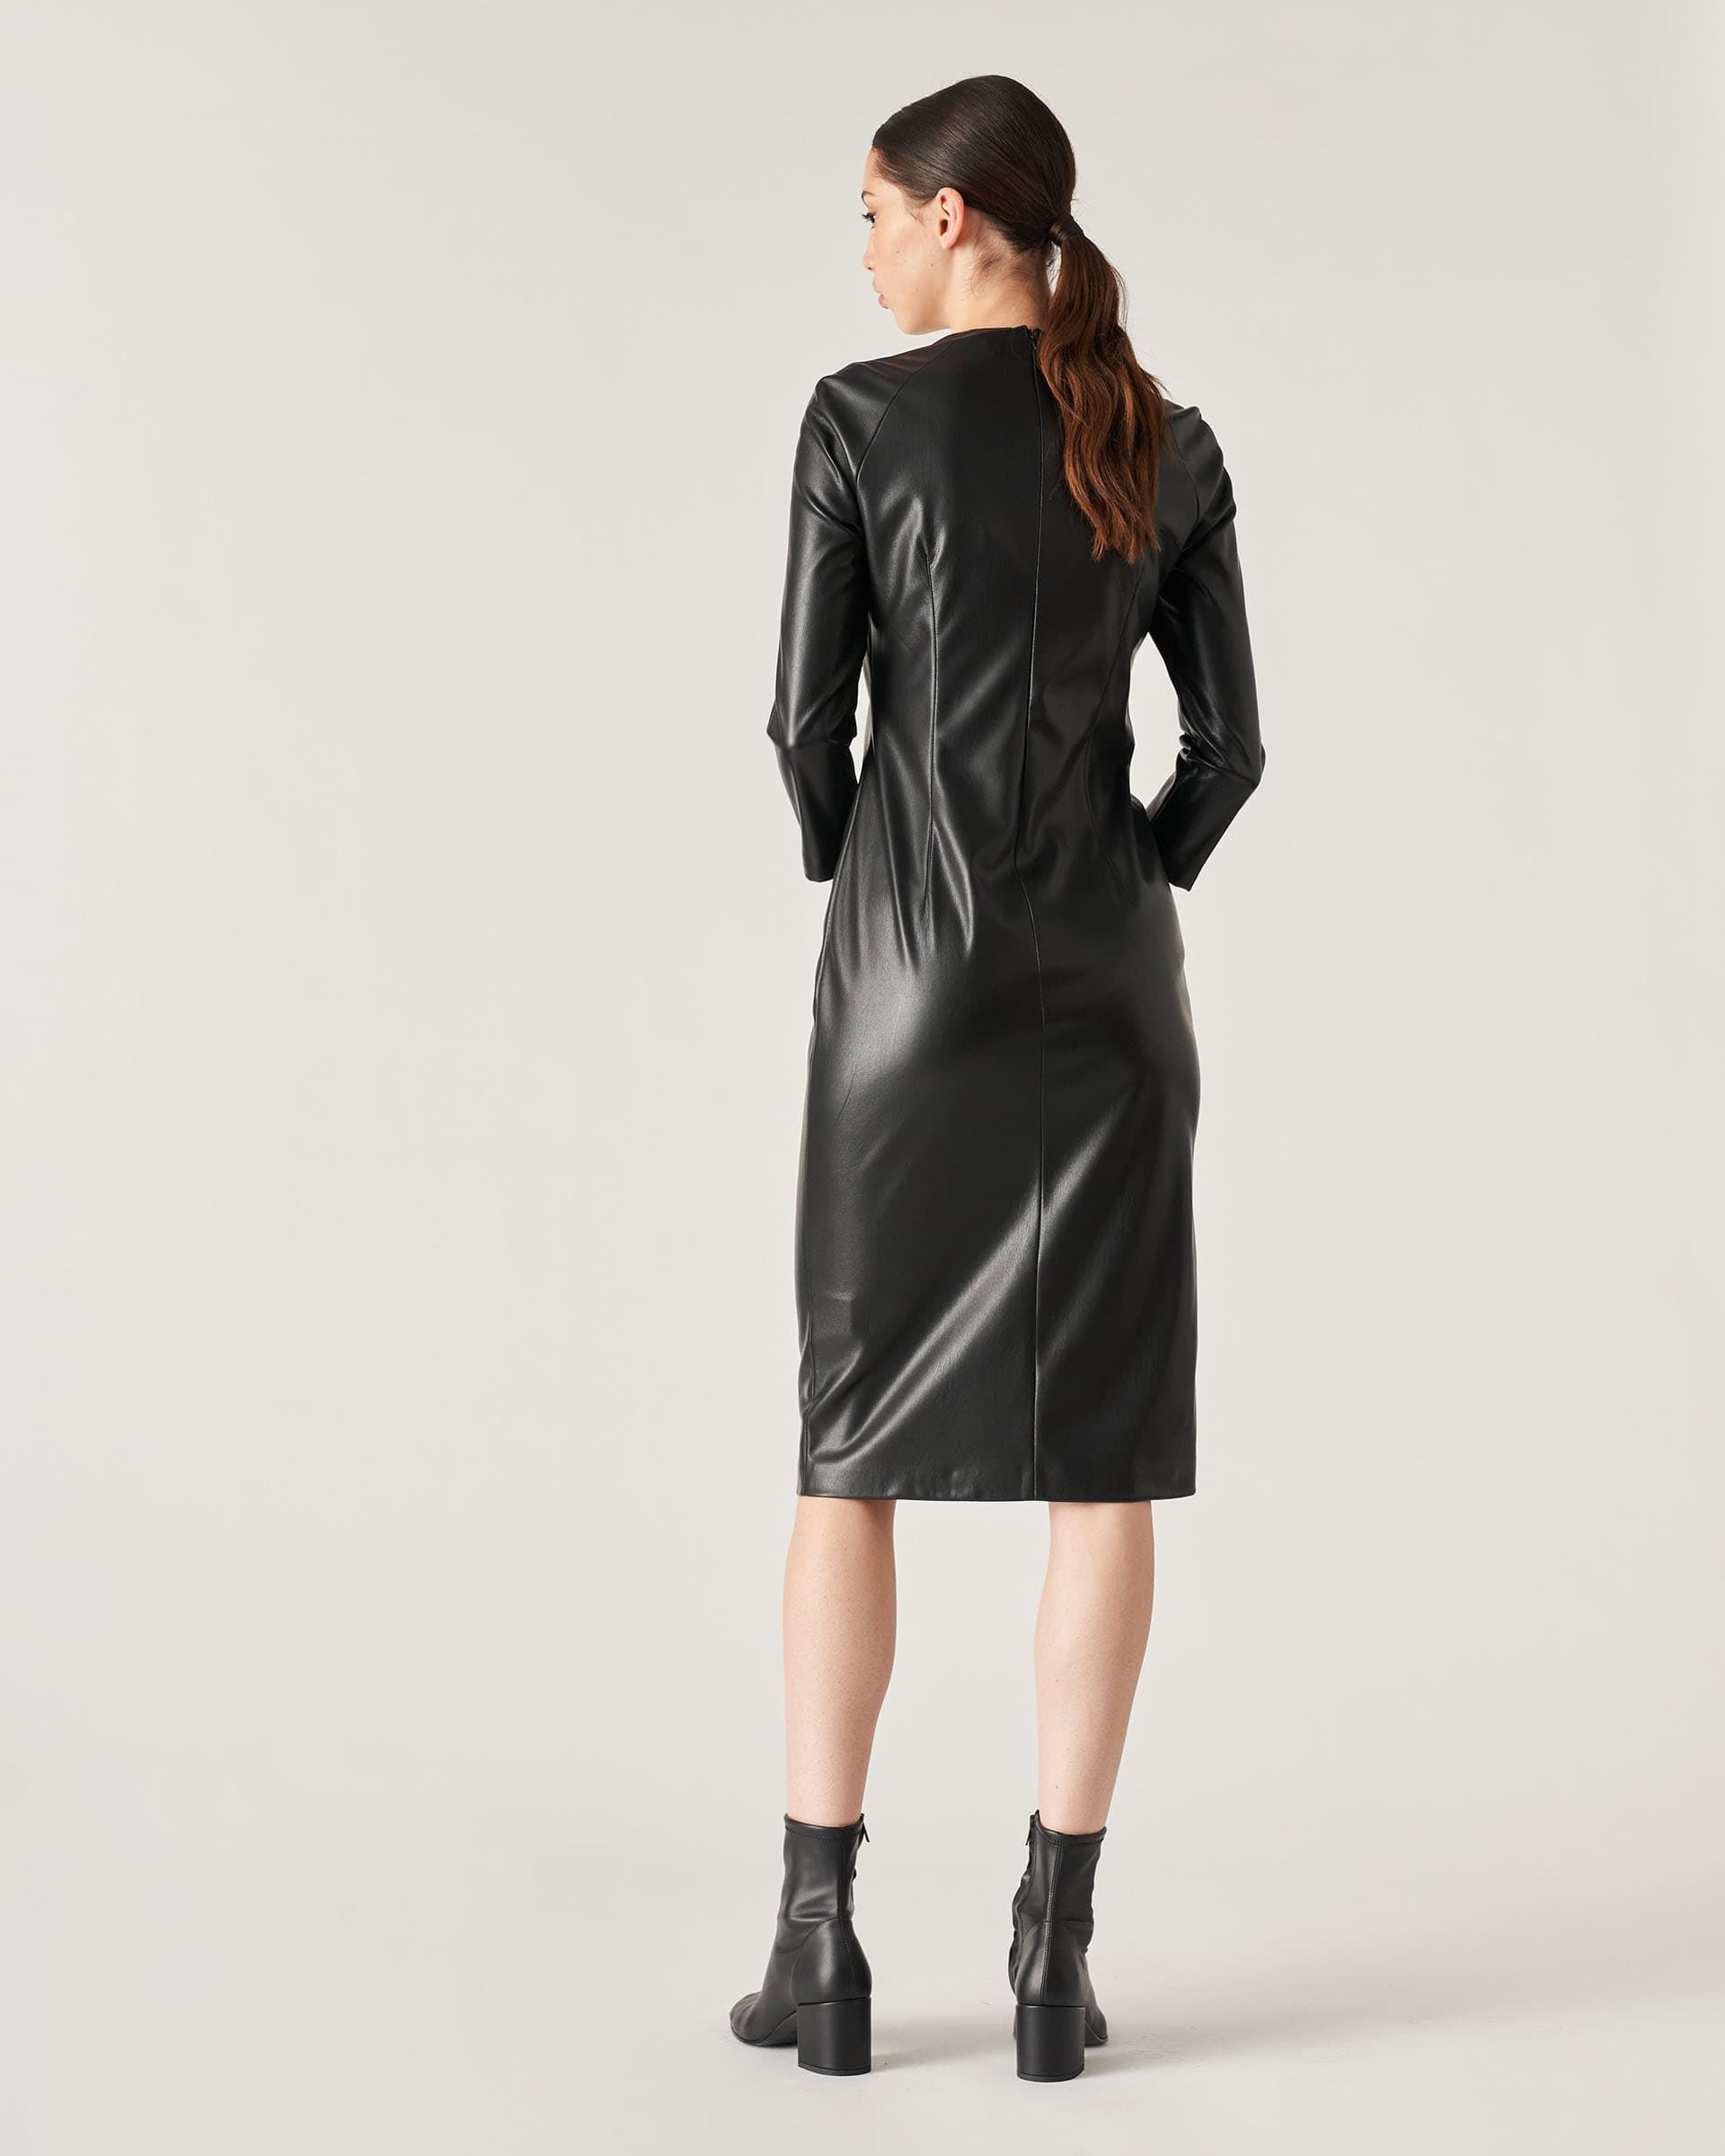 The Market Store | Fitted Eco-leather Dress